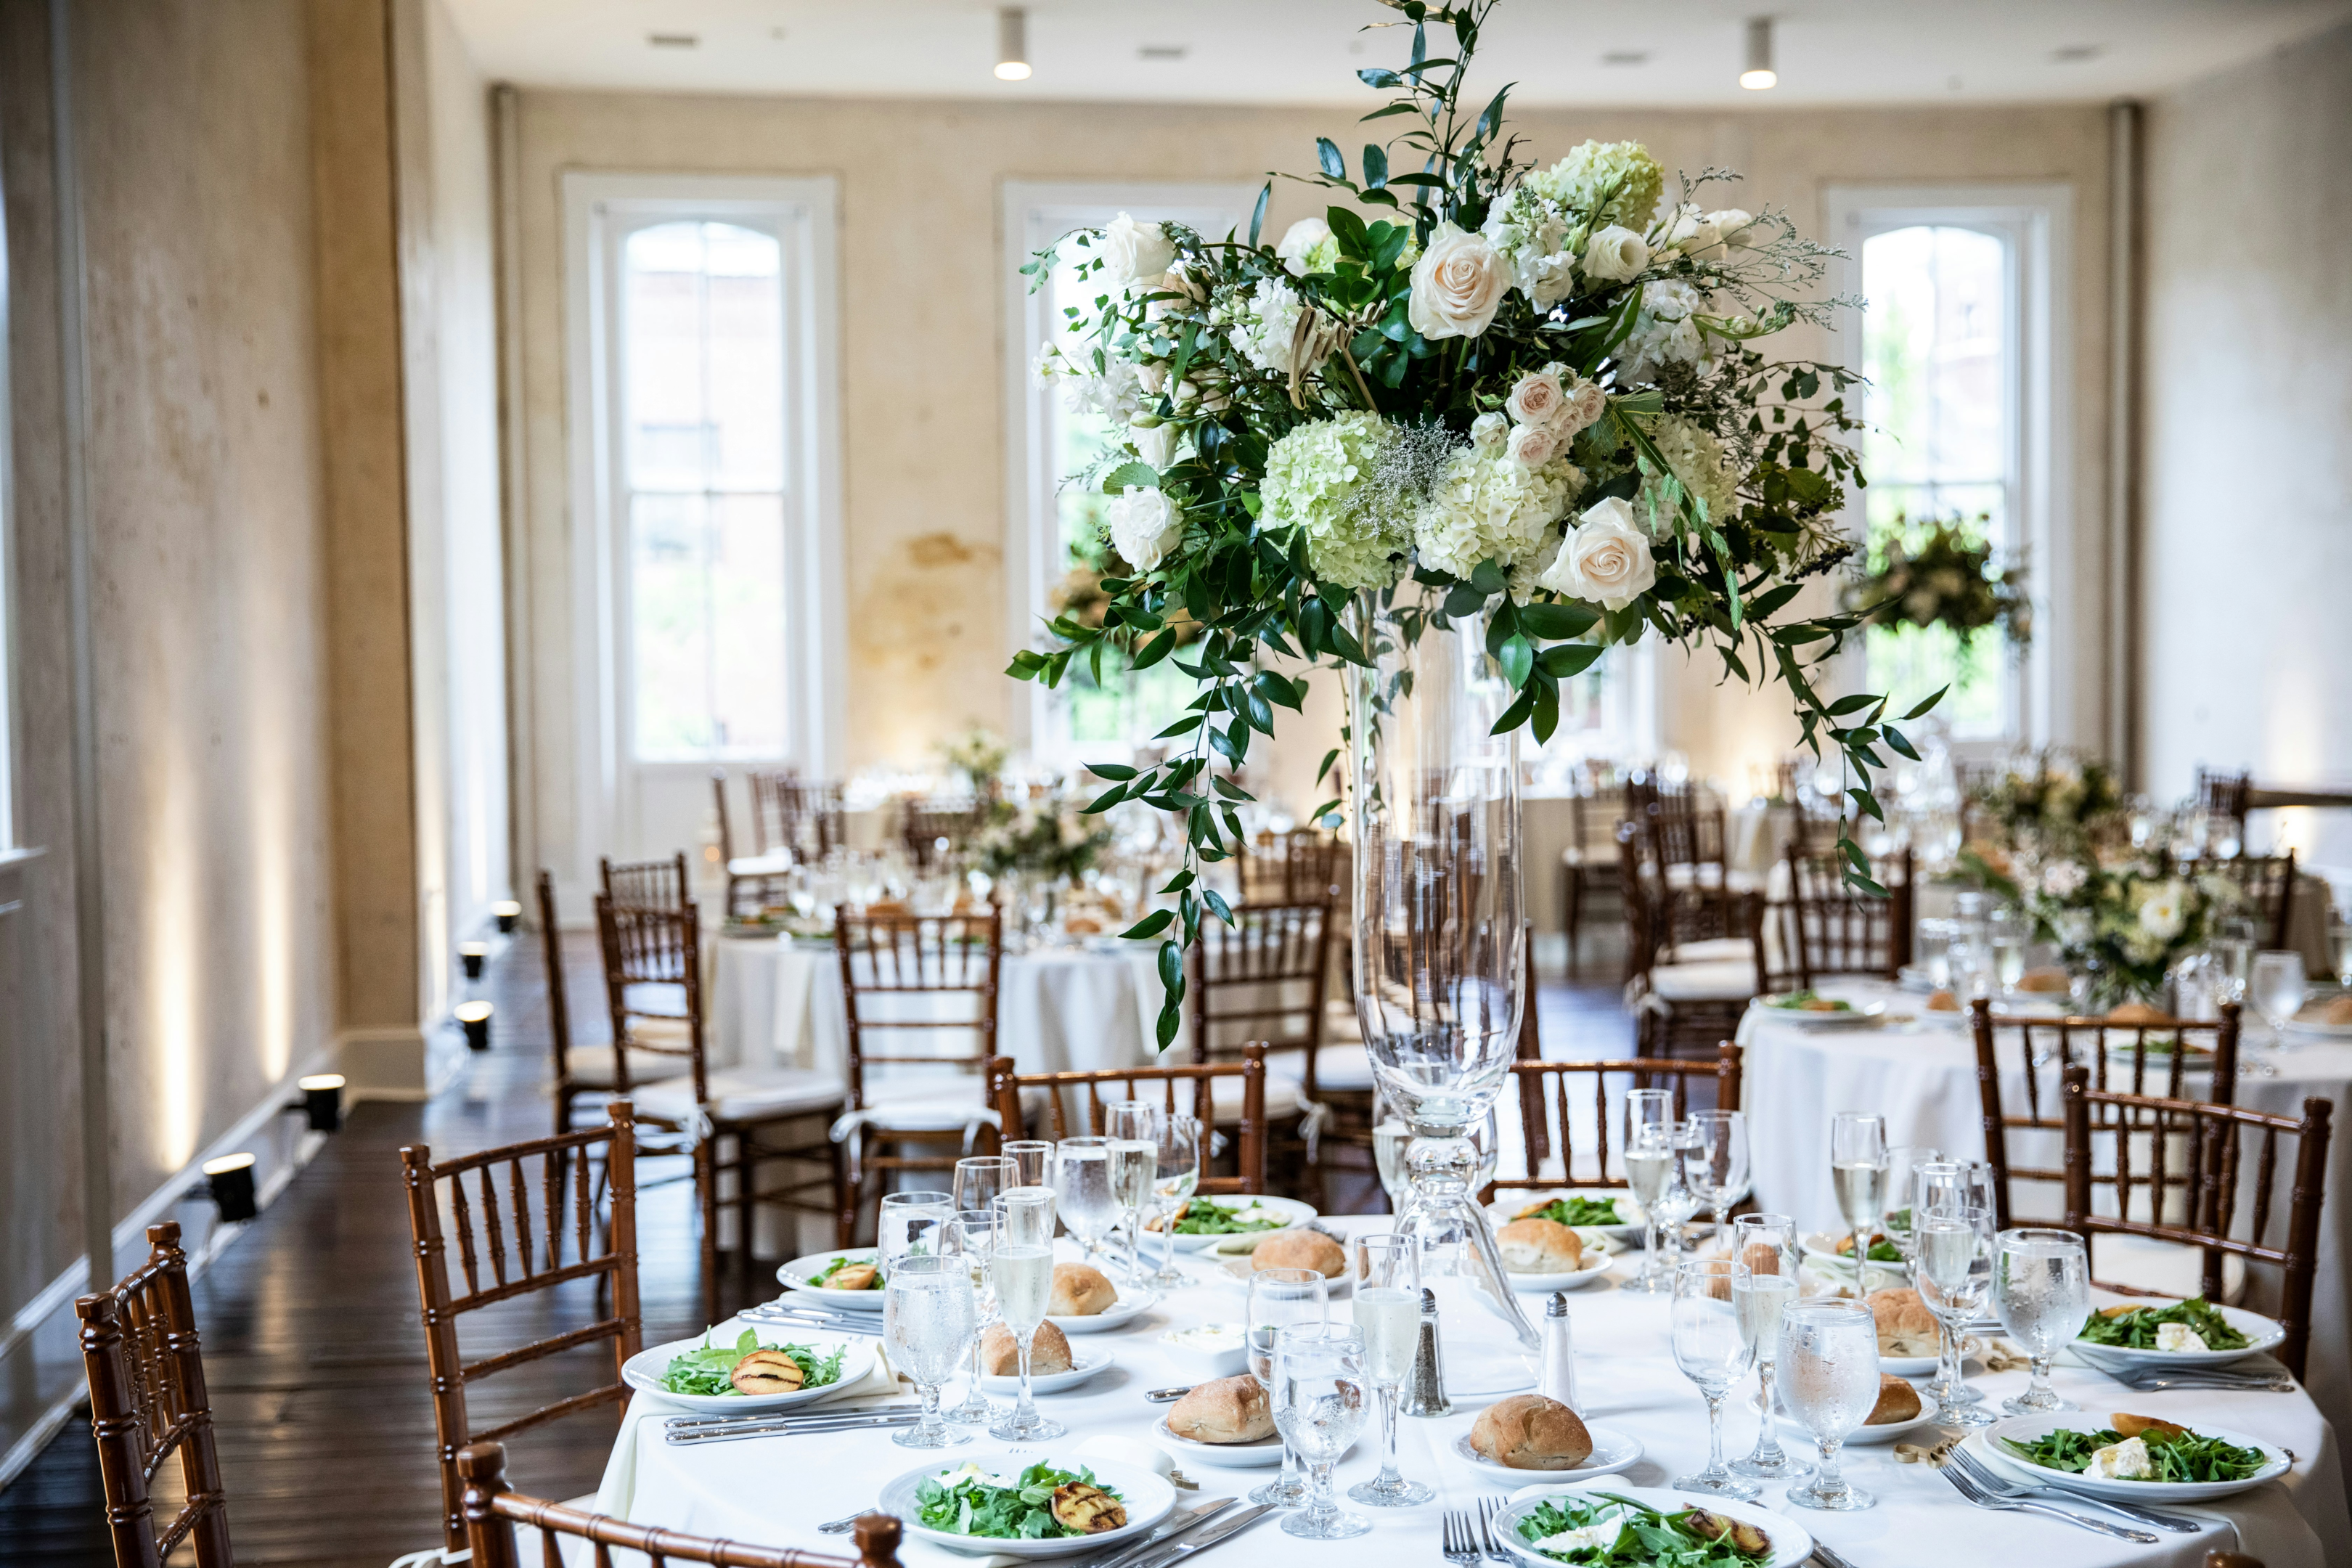 https://unsplash.com/photos/a-table-set-for-a-formal-dinner-with-white-flowers-and-greenery-ufpn_xkqlss